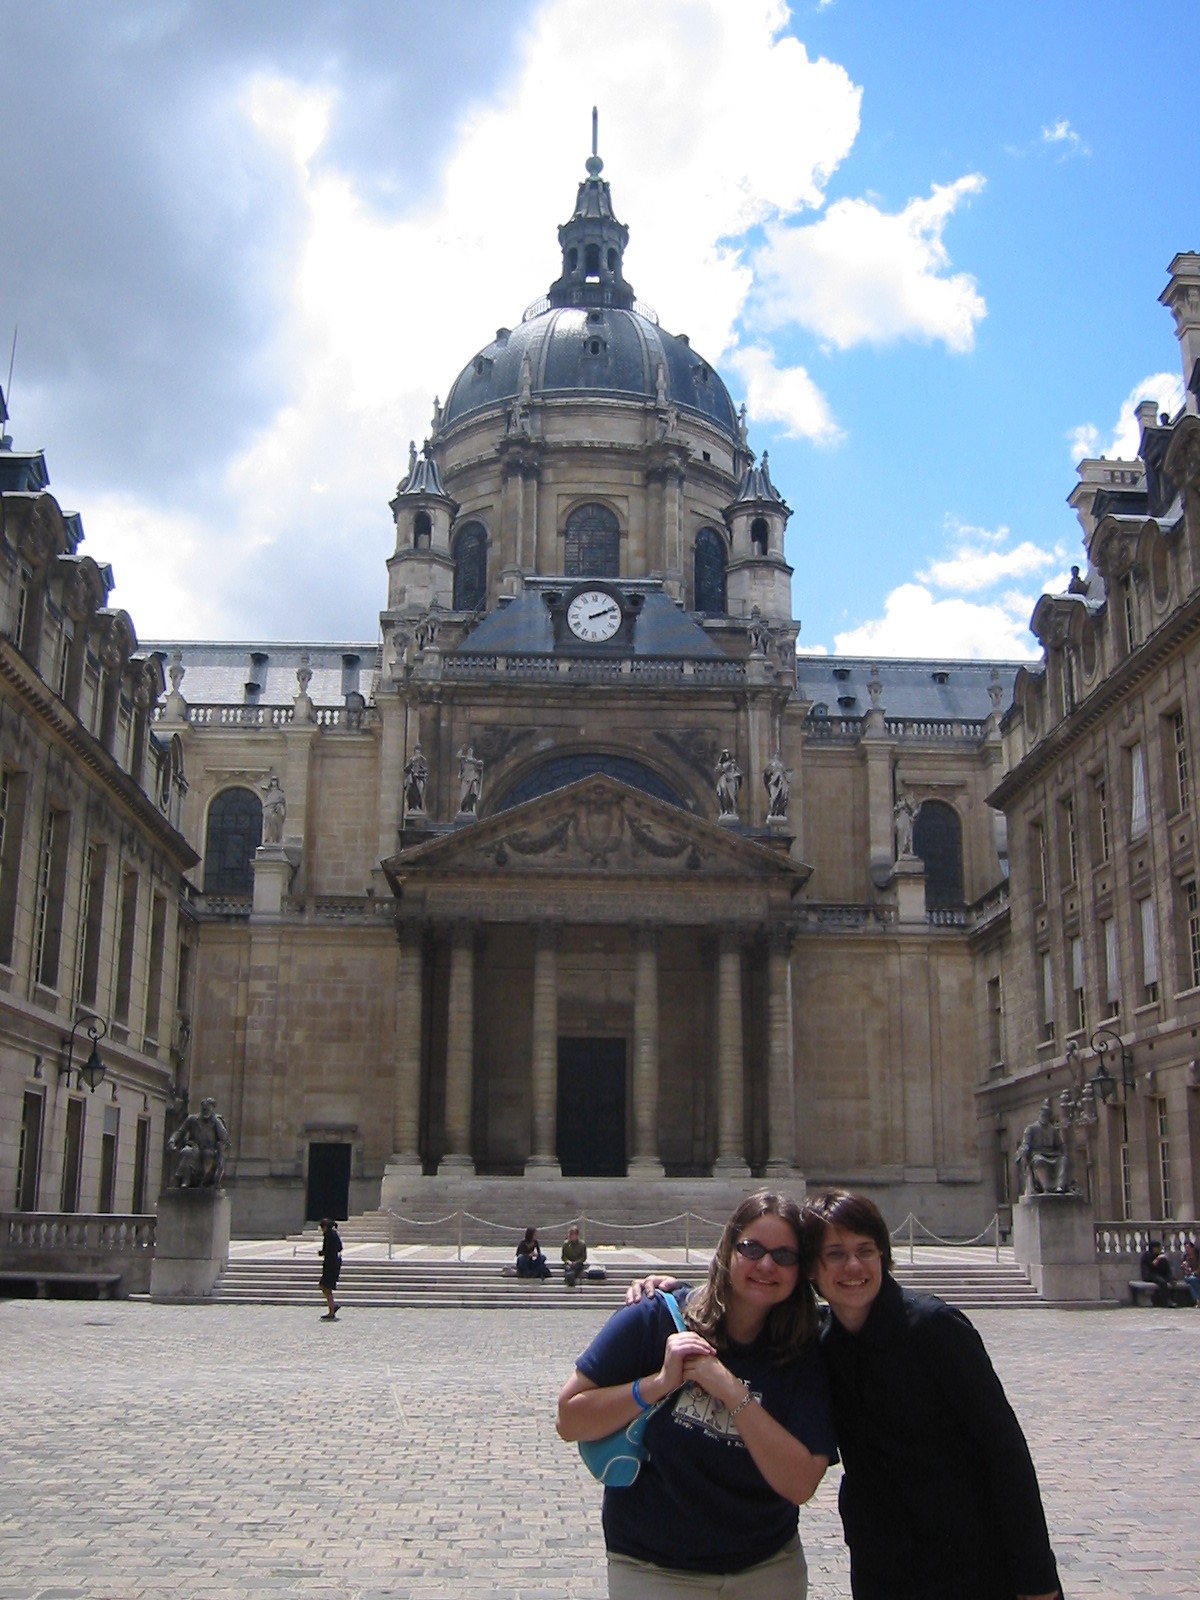 Students in the courtyard of the Sorbonne